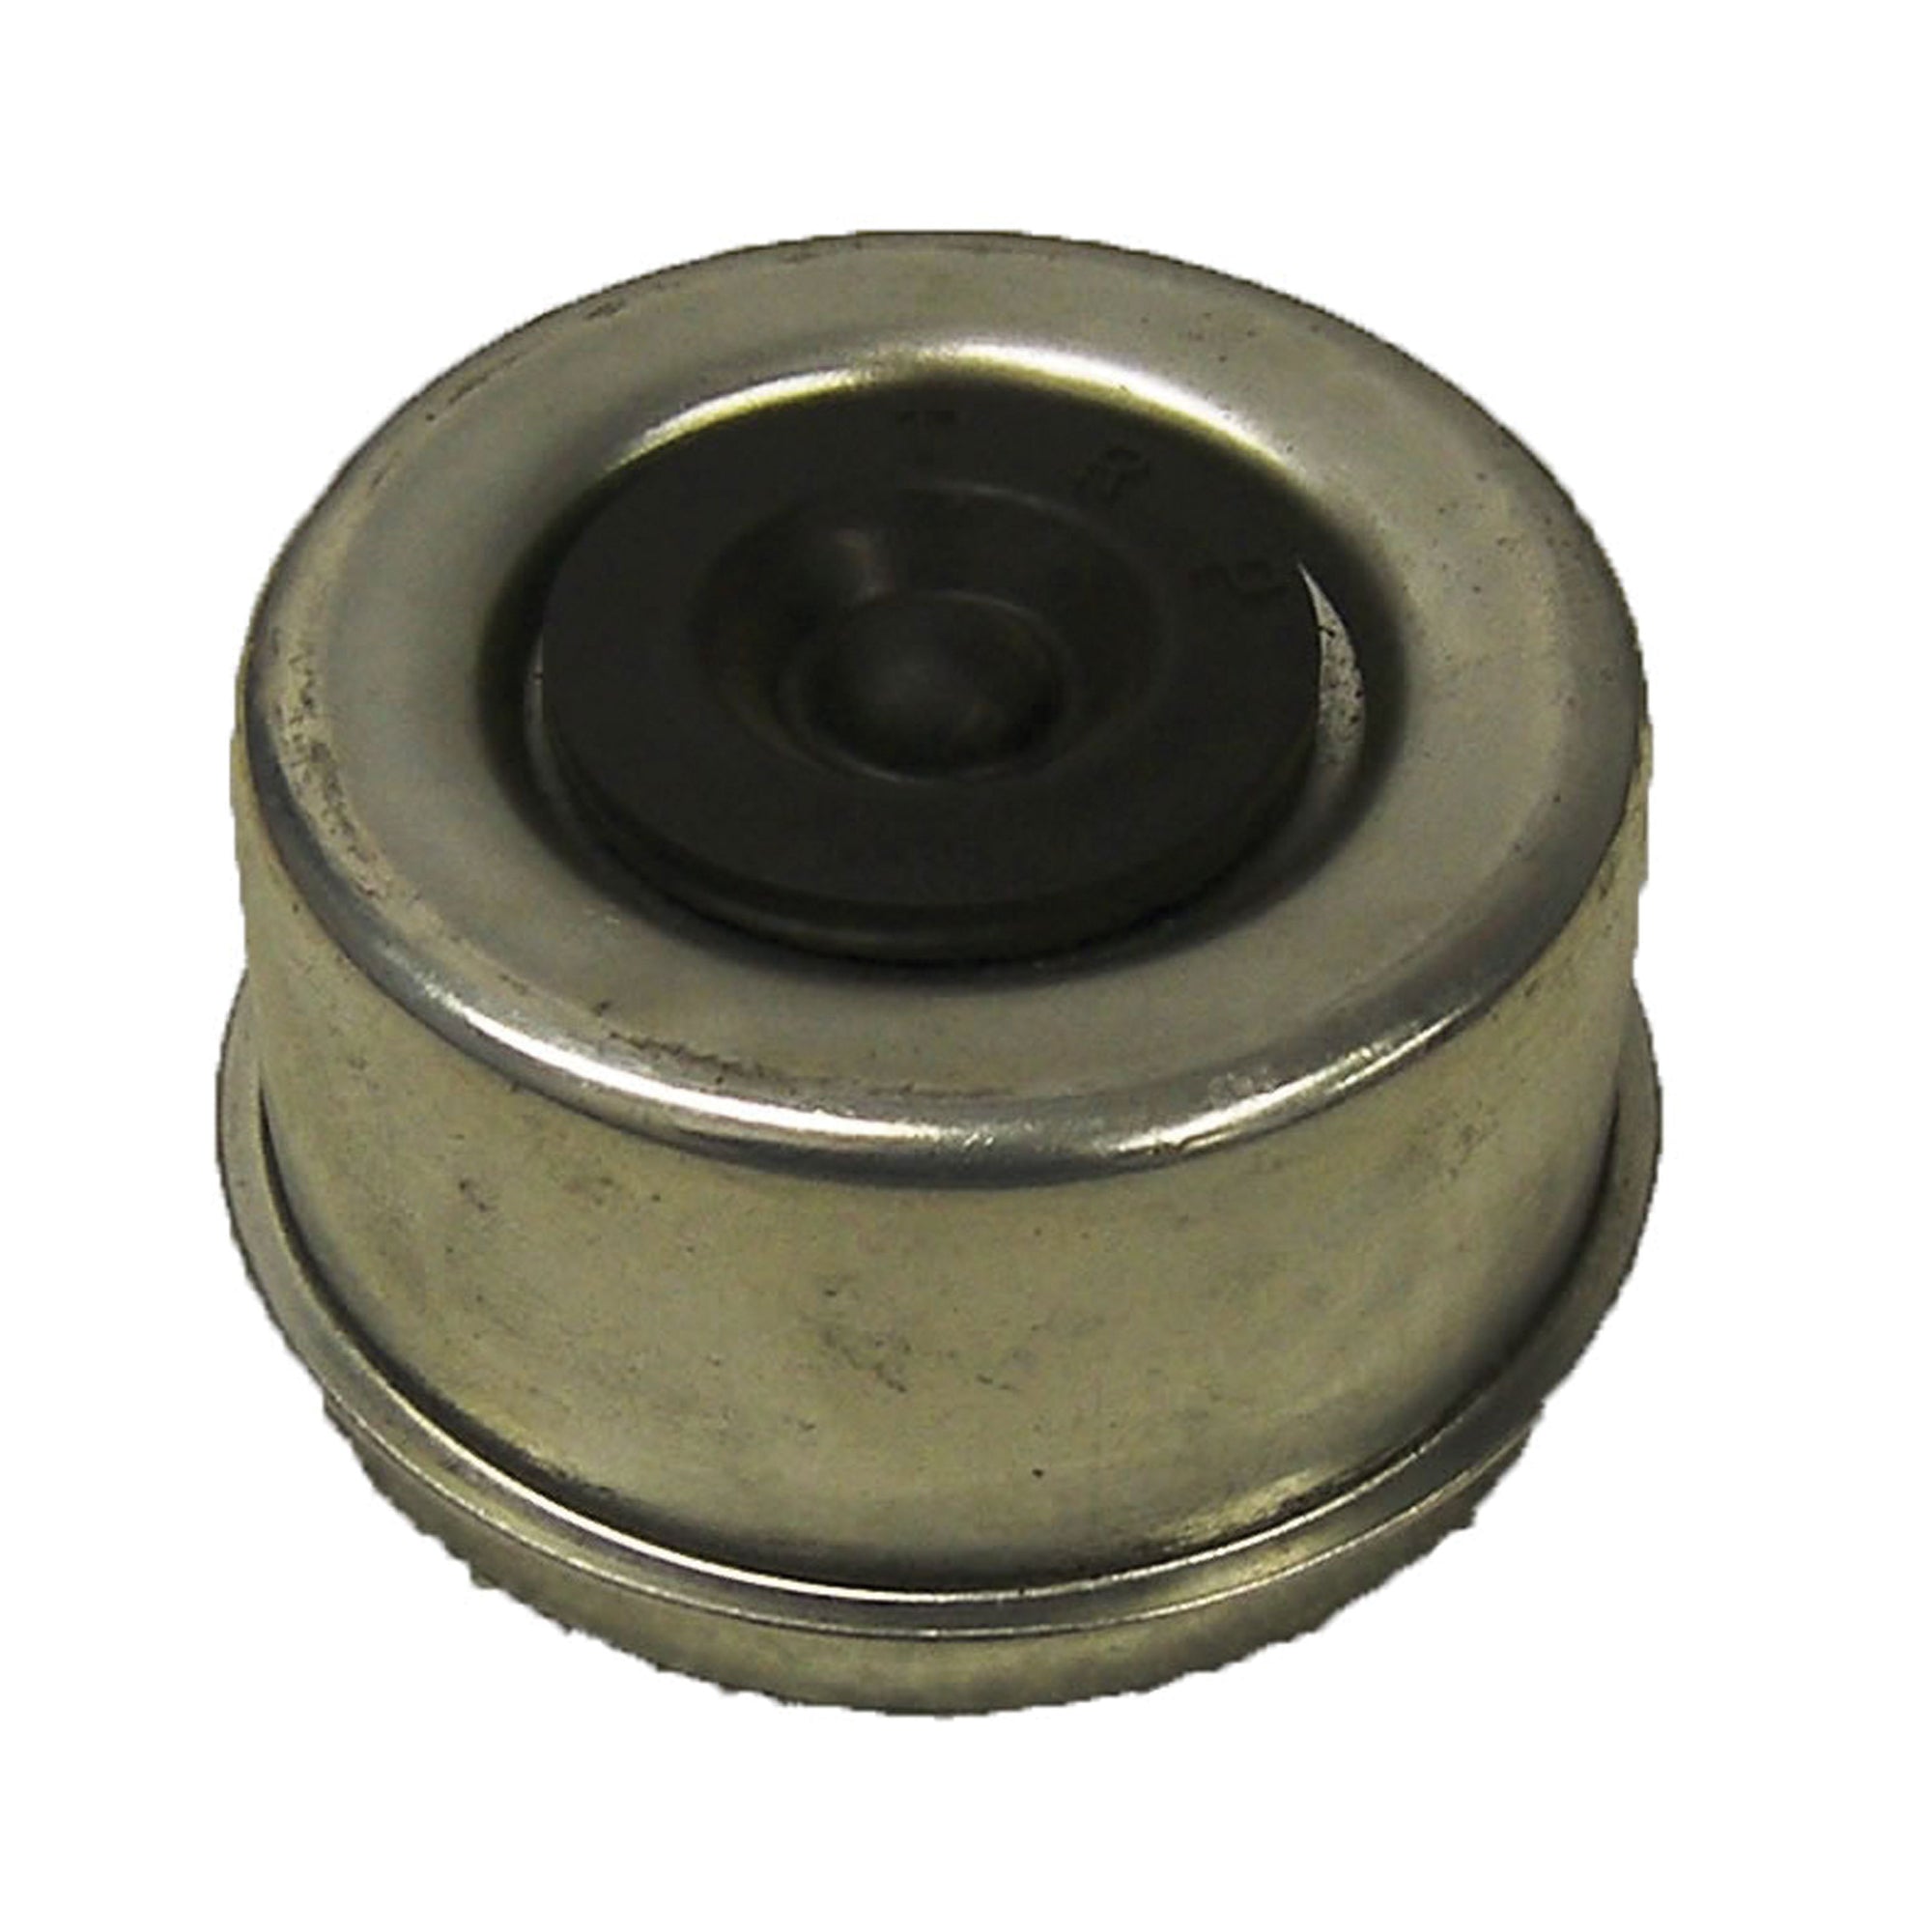 AP Products 014-127300 Dust Cap DC275L - Lubed for 7K and 8K, Each